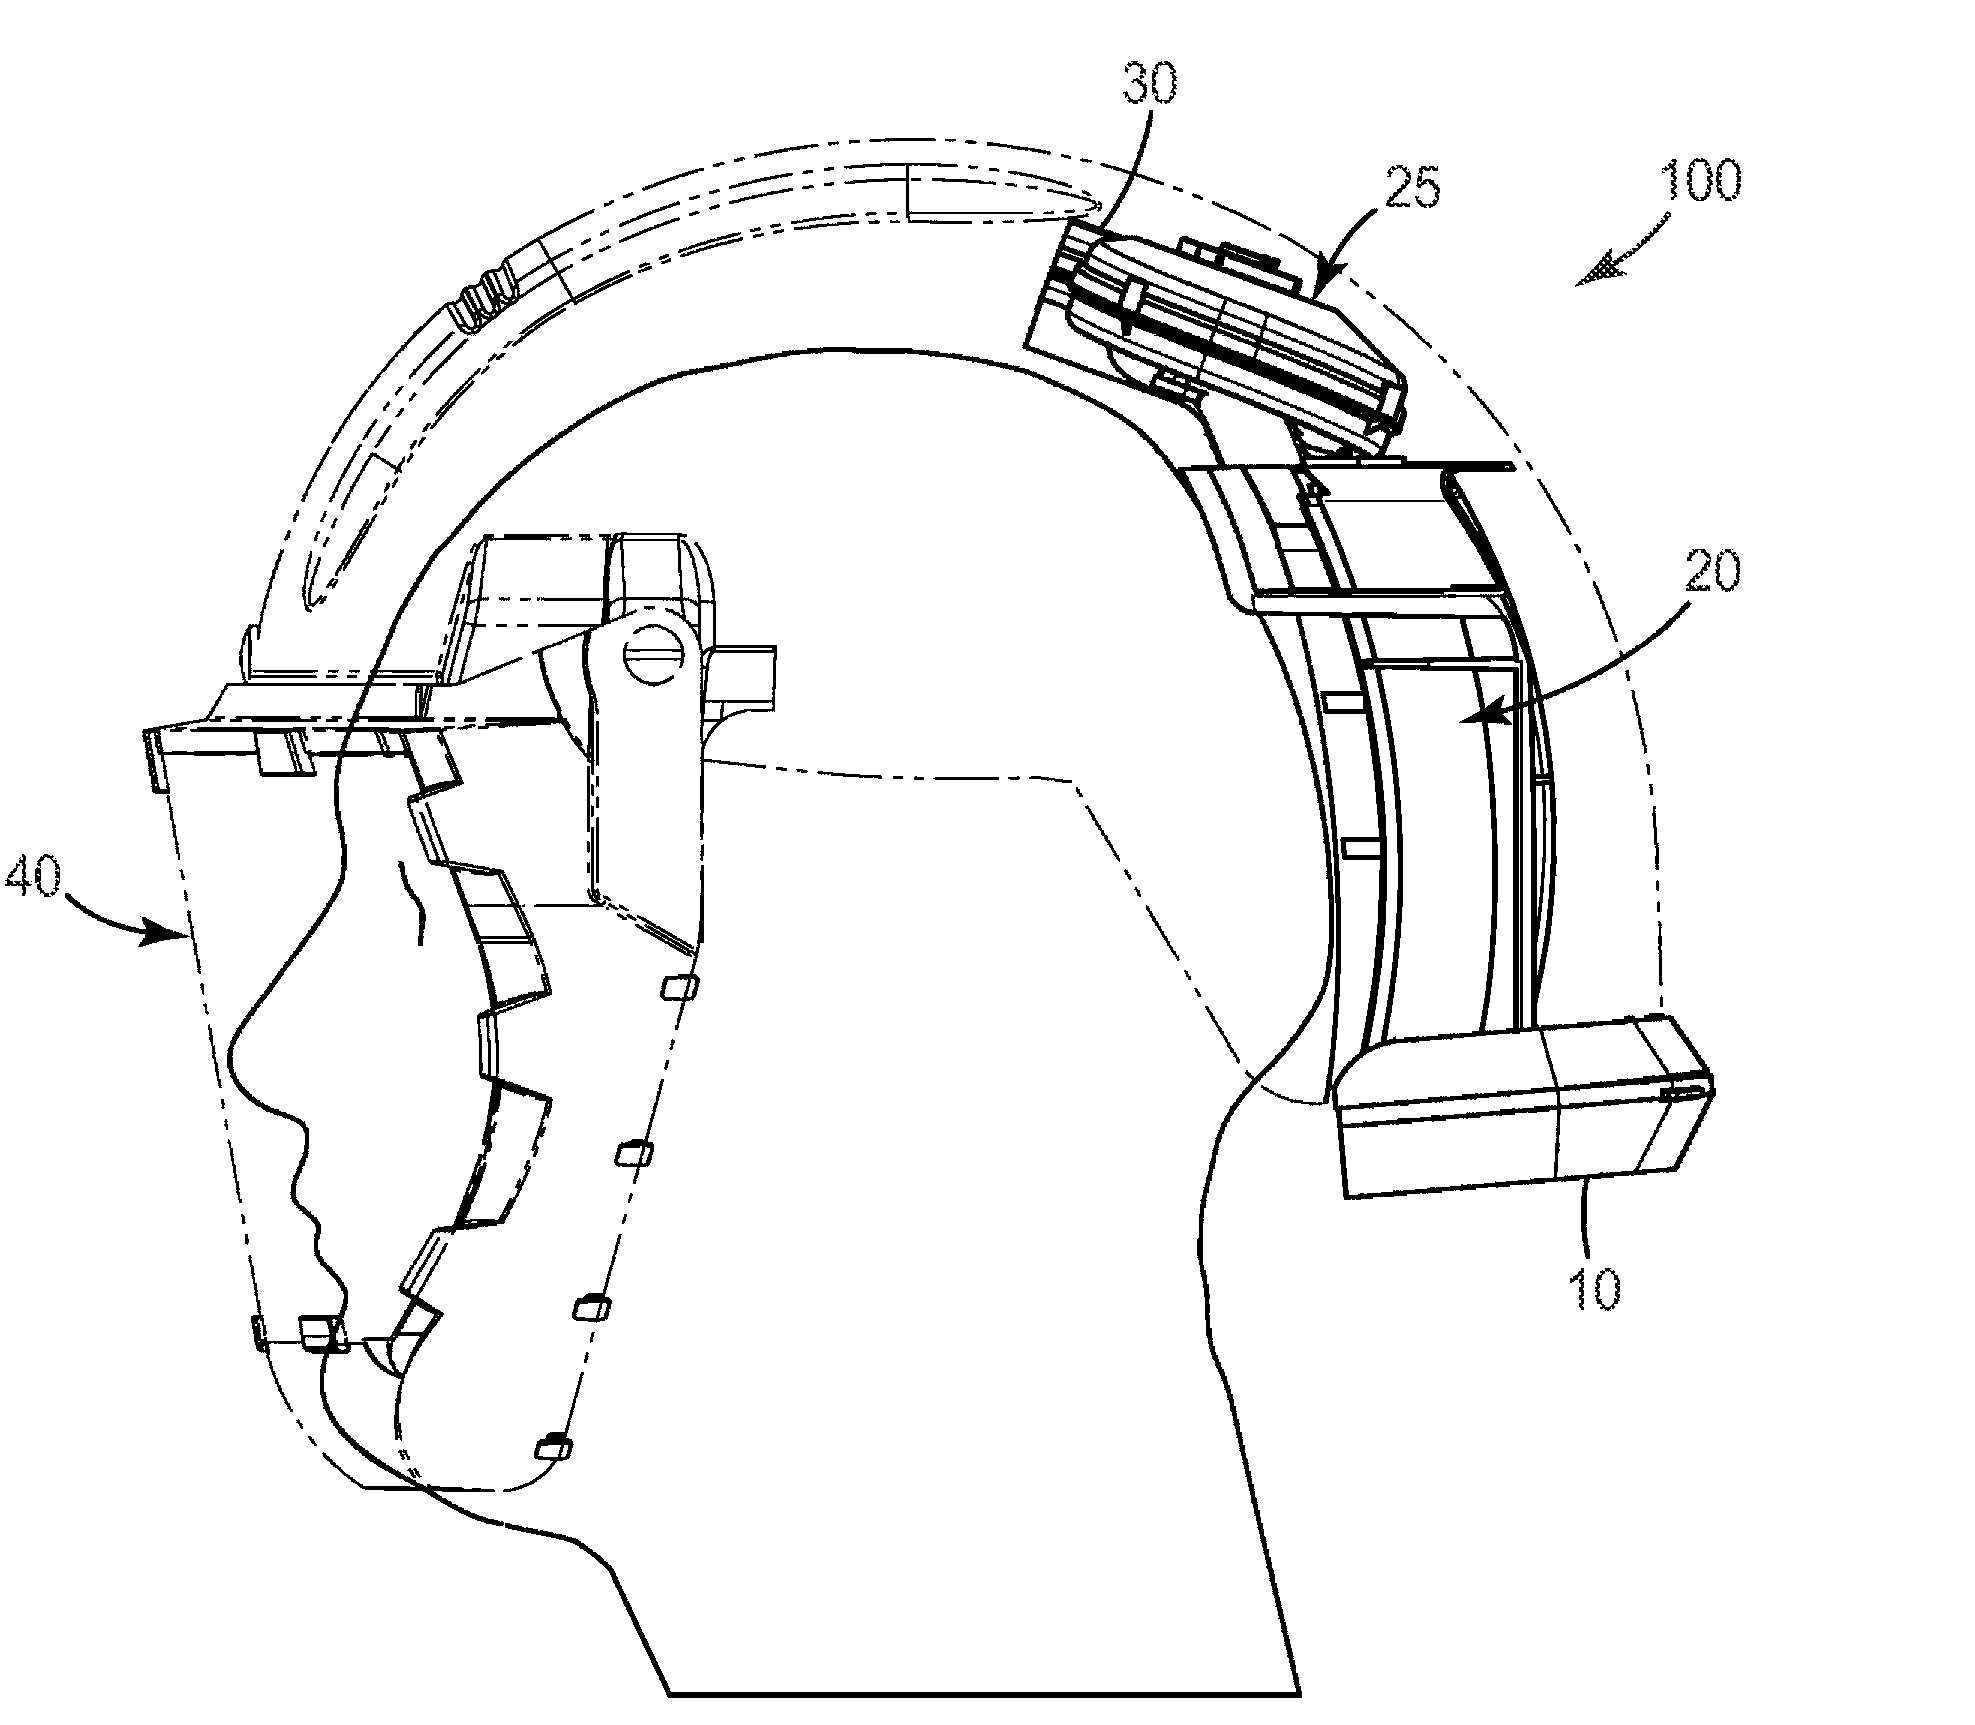 Helmet-mounted respirator apparatus with a dual plenum system